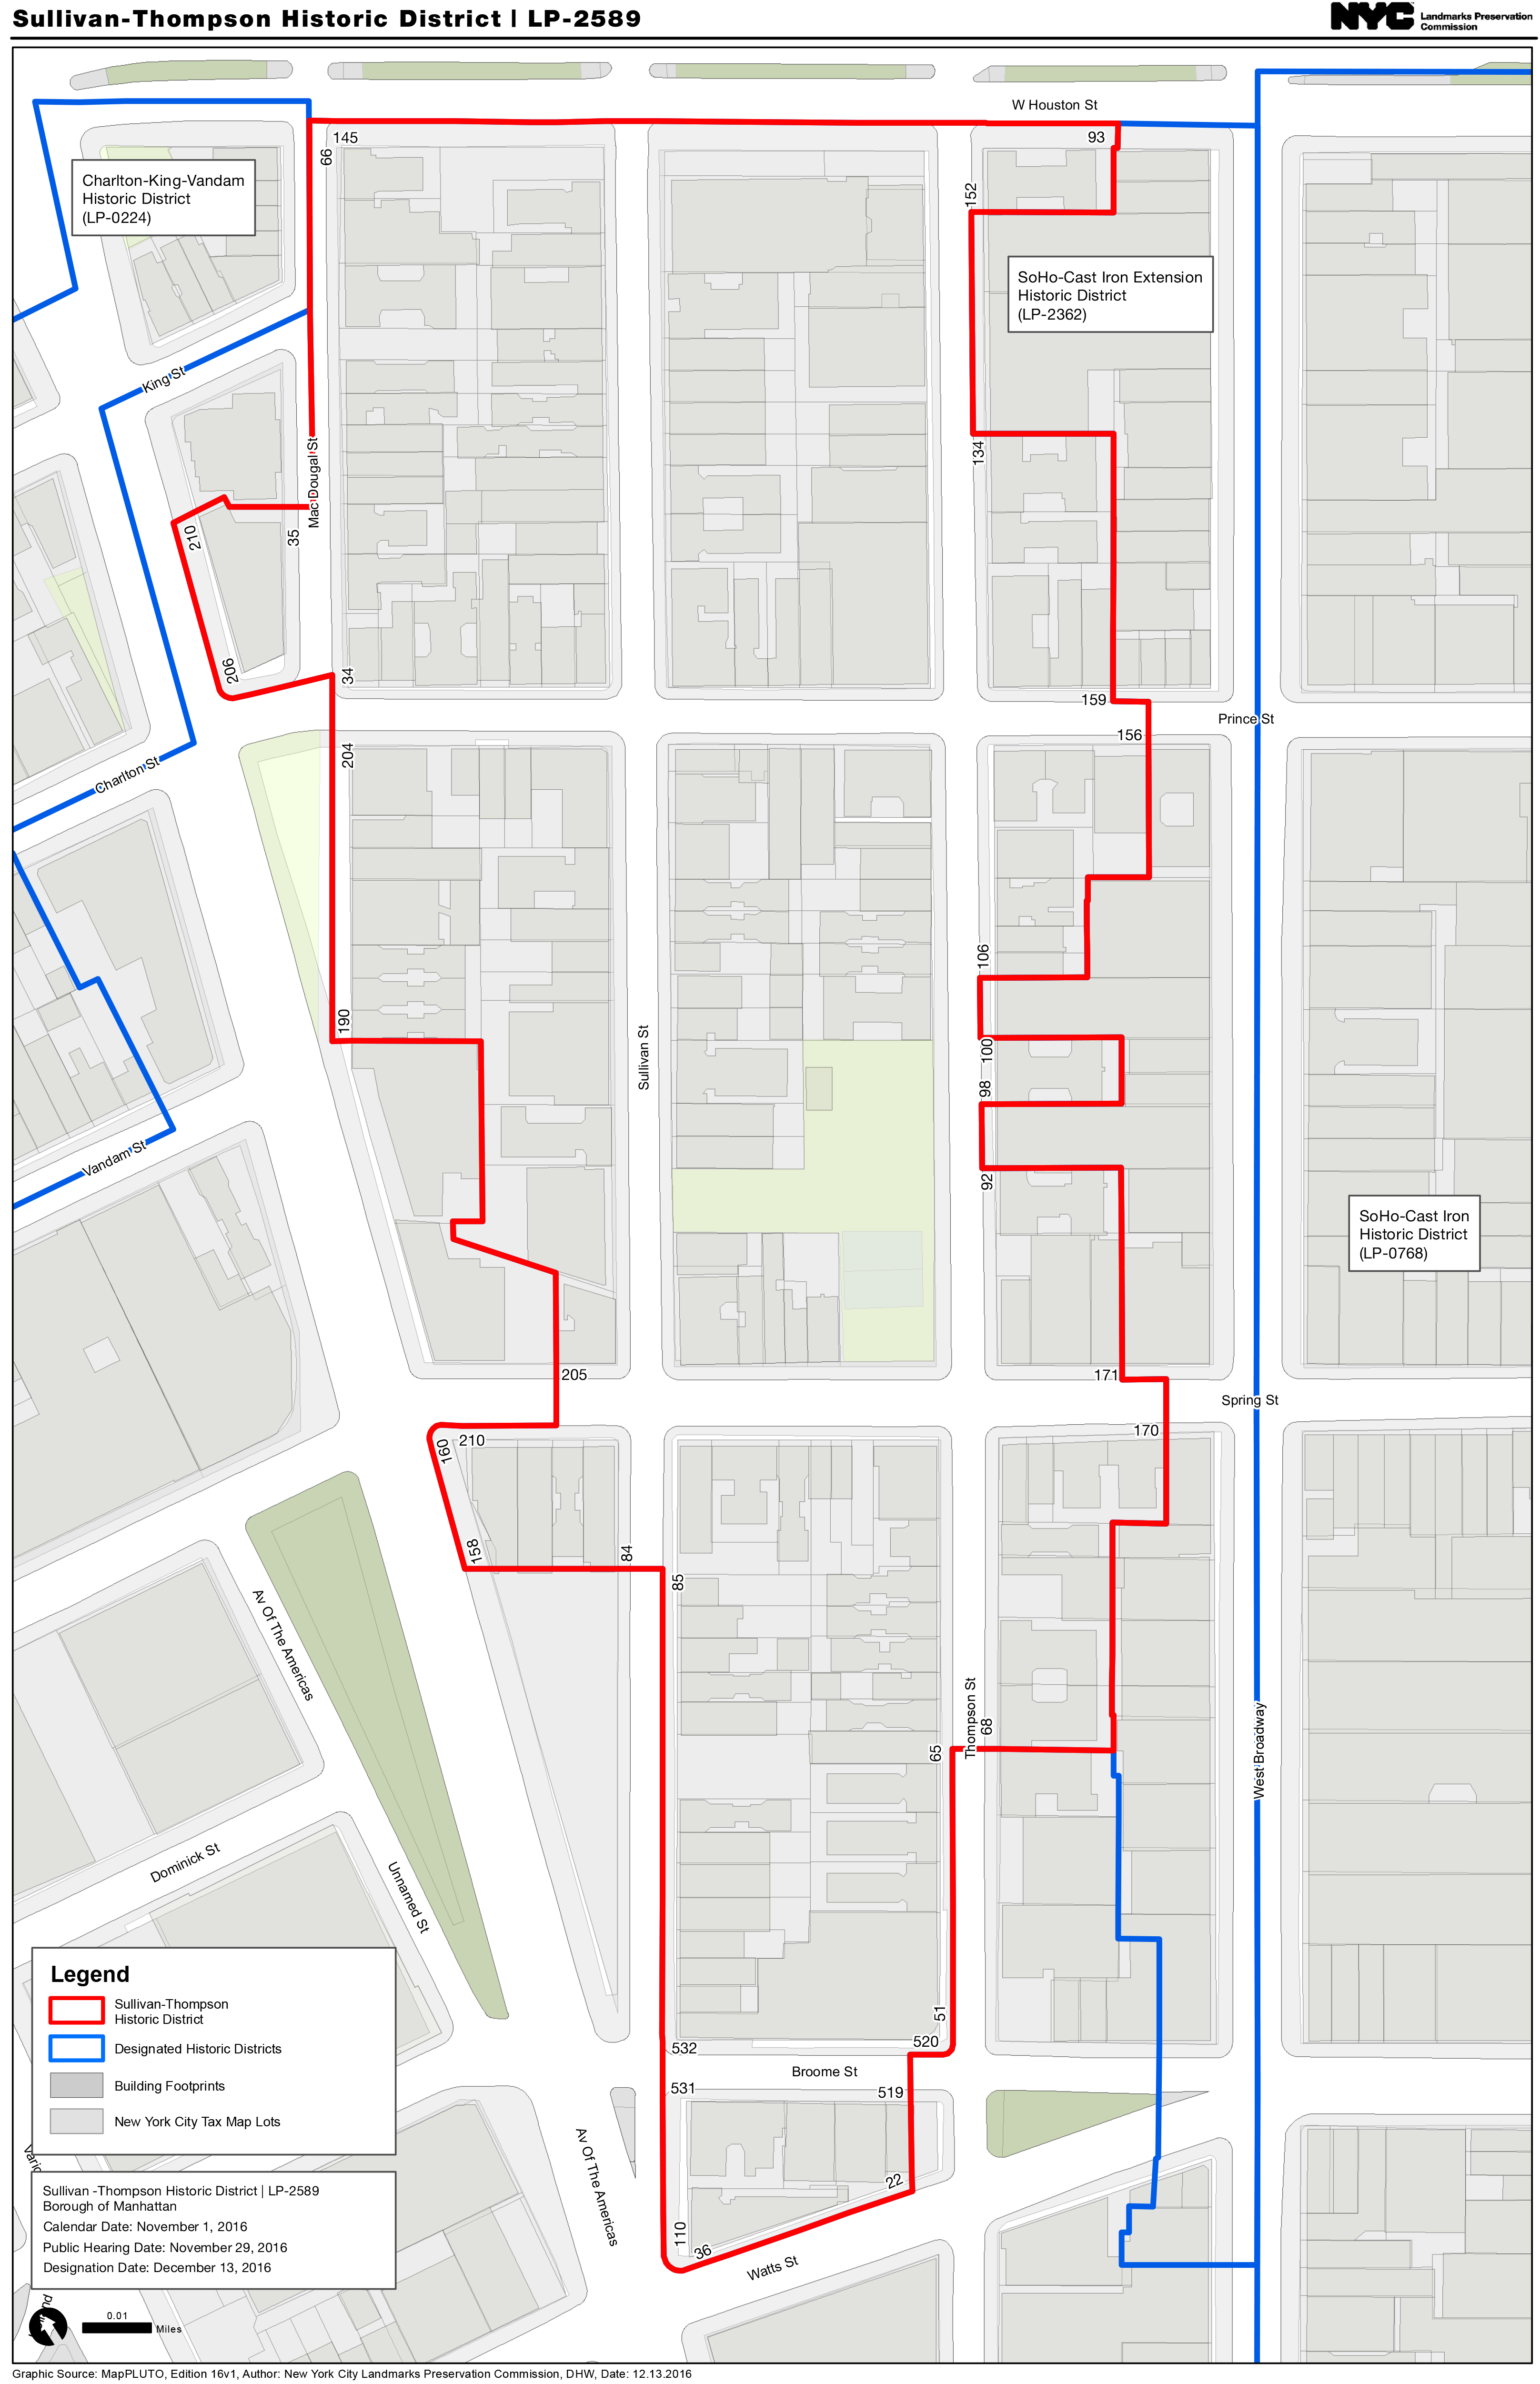 Map of the Sullivan-Thompson Historic District, as designated on December 13, 2016